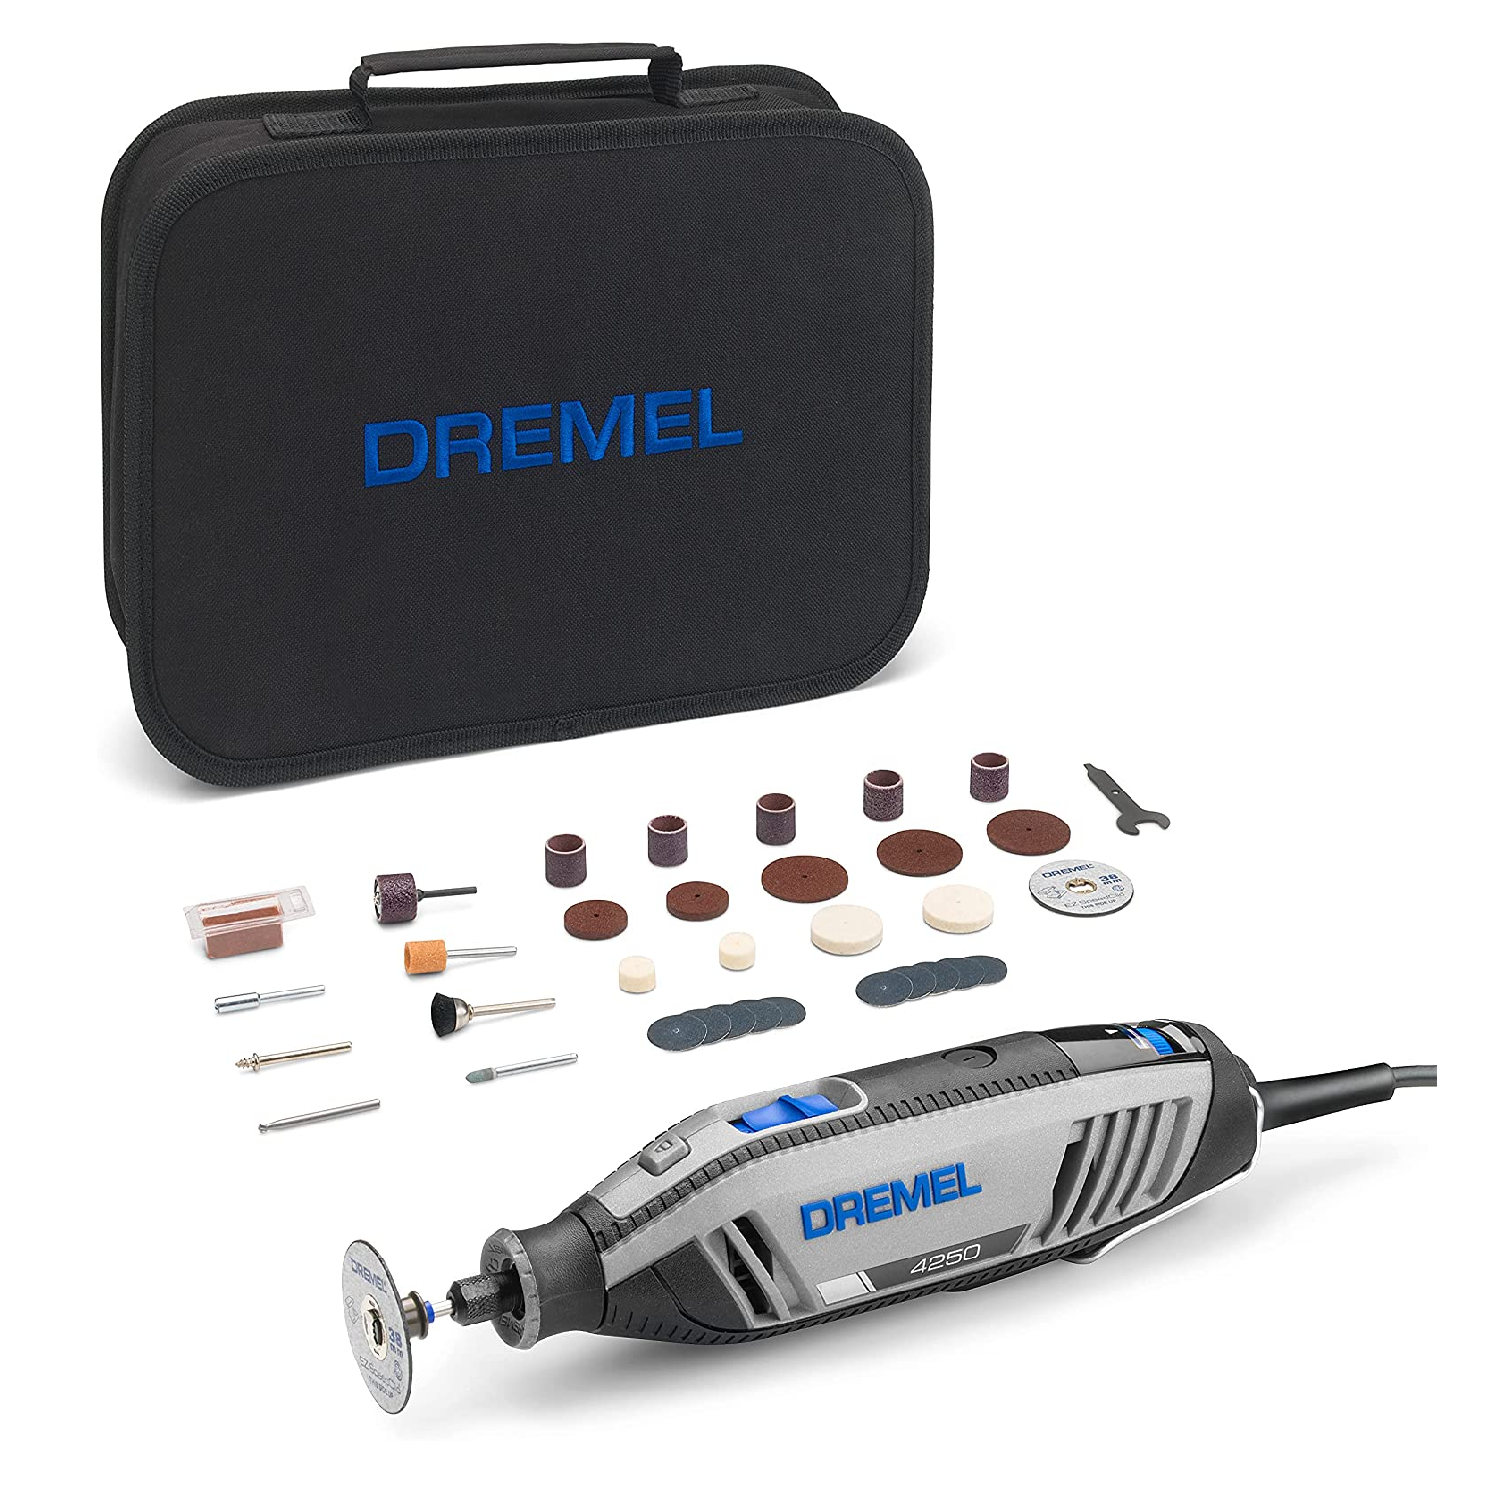 Dremel DRE4250-35 Rotary Tool With 35 Accessories Kit